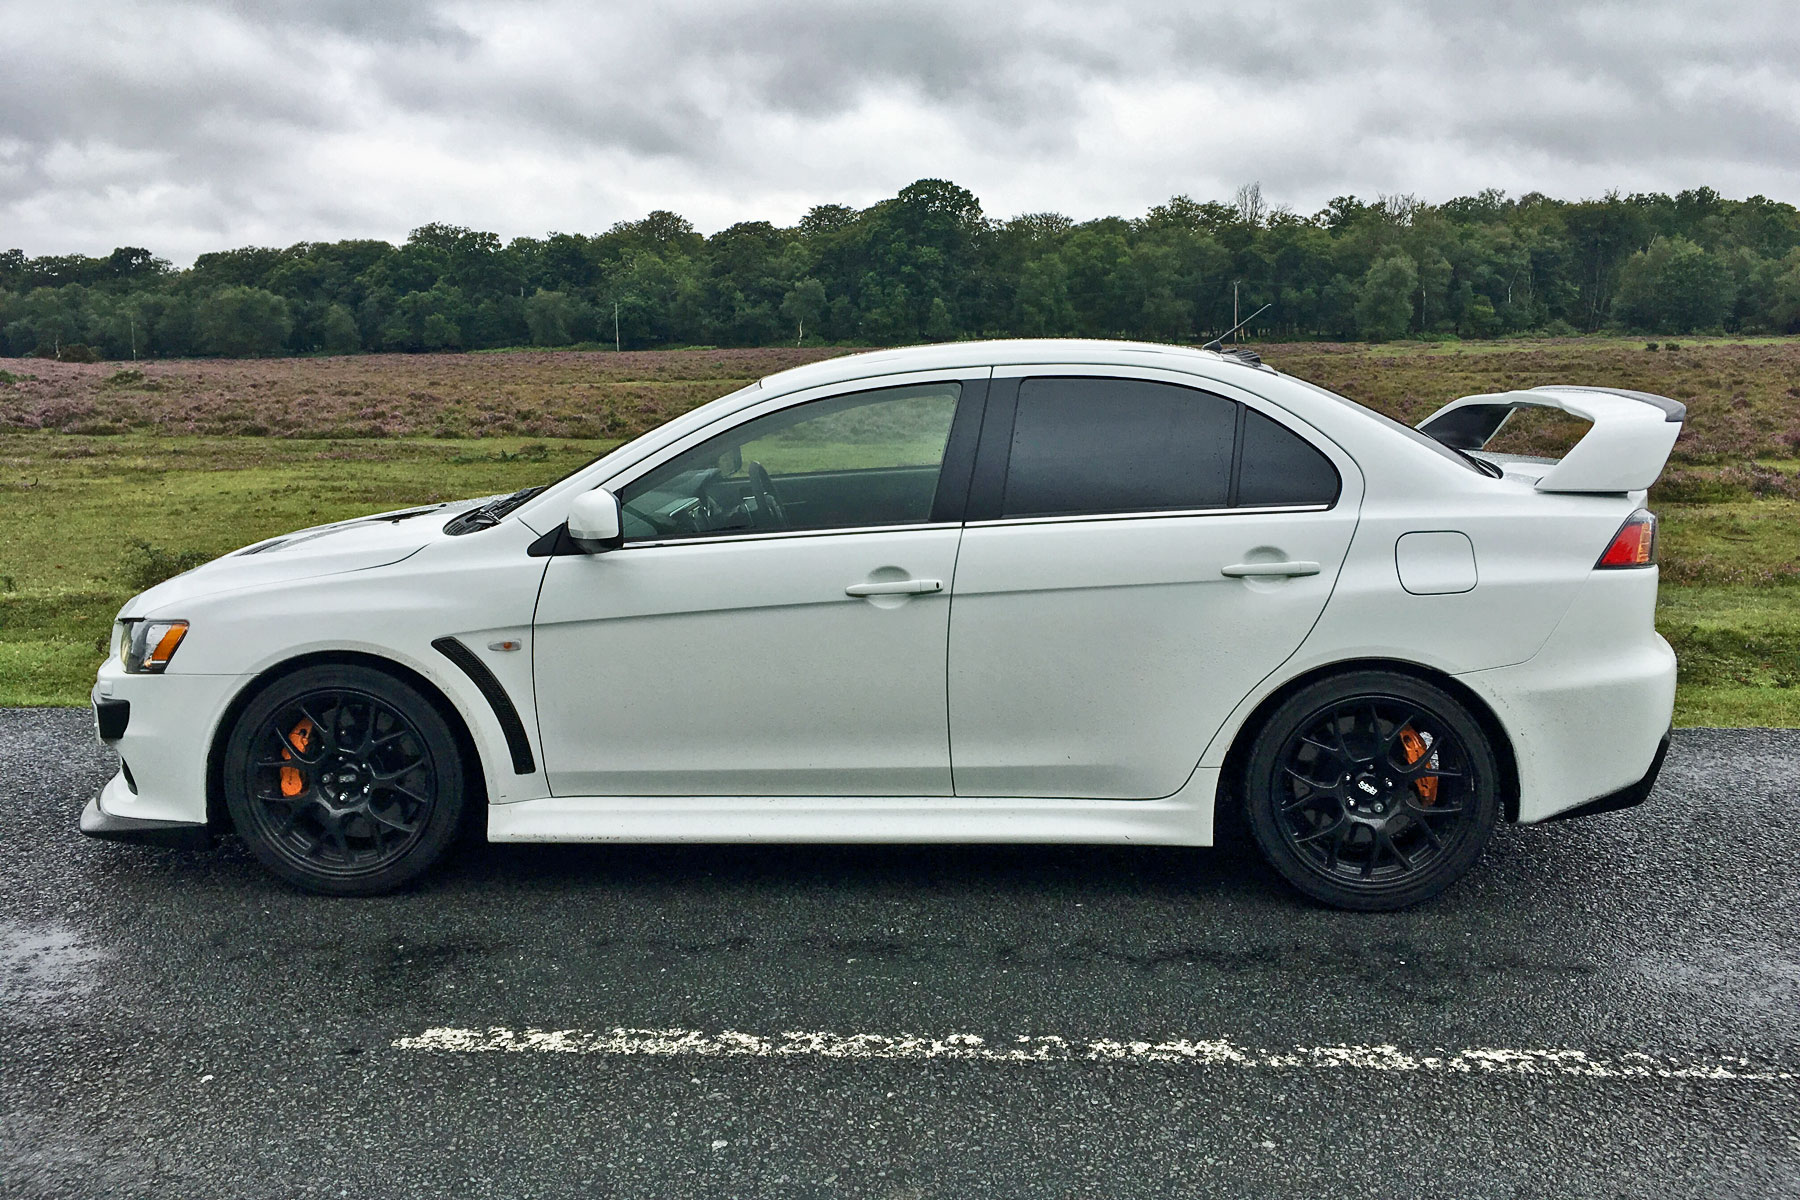 Fast and furious: driving the ultimate Mitsubishi Evo